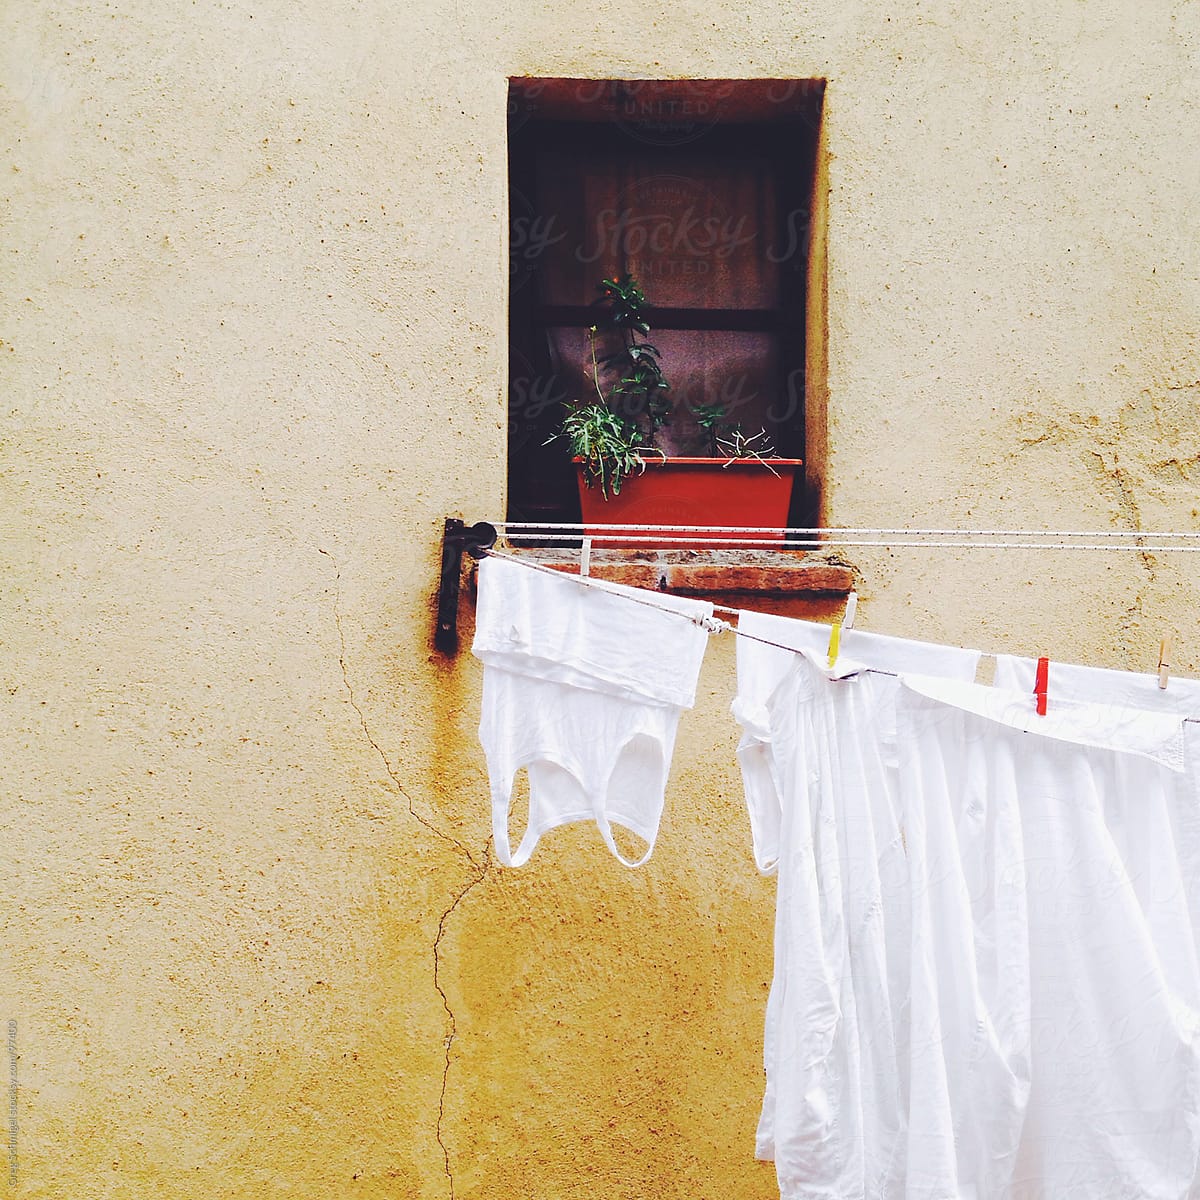 Fresh linens and laundry hanging on a line in Italy